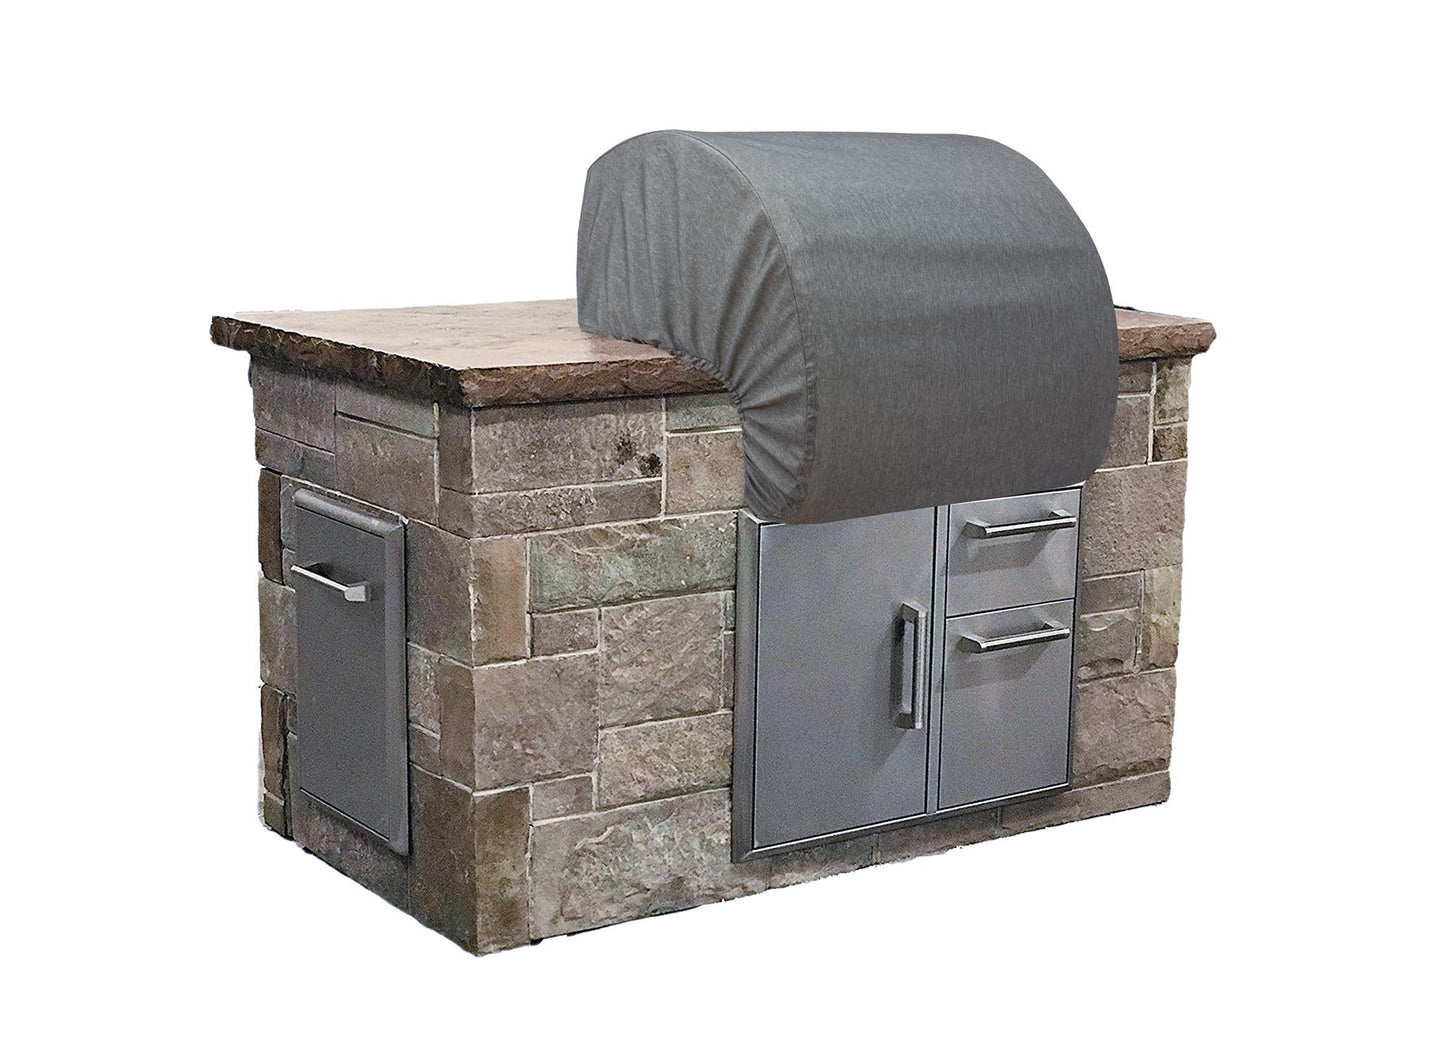 Grill Cover Platinum 38" Build-in Grill Cover (39"x26"x15")